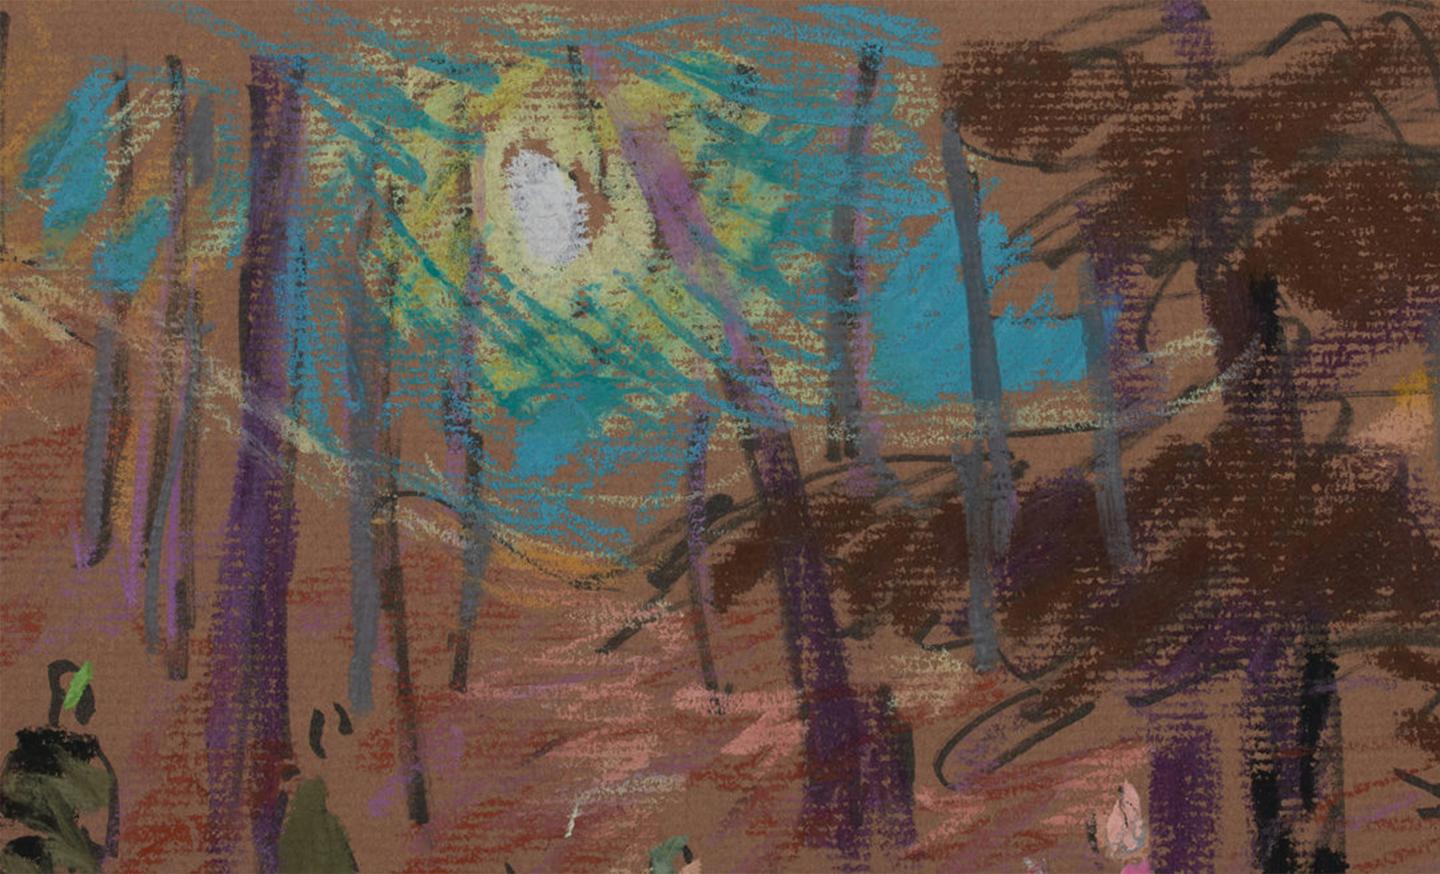 Work sold to benefit the CLEVELAND INSTITUTE OF ART

Joseph B. O’Sickey (American, 1918–2013)
Horseback Riders
Pastel on brown paper
Signed lower left 
9.5 x 12.5 inches 

Joseph O'Sickey, born in Detroit in 1918, was a painter and teacher